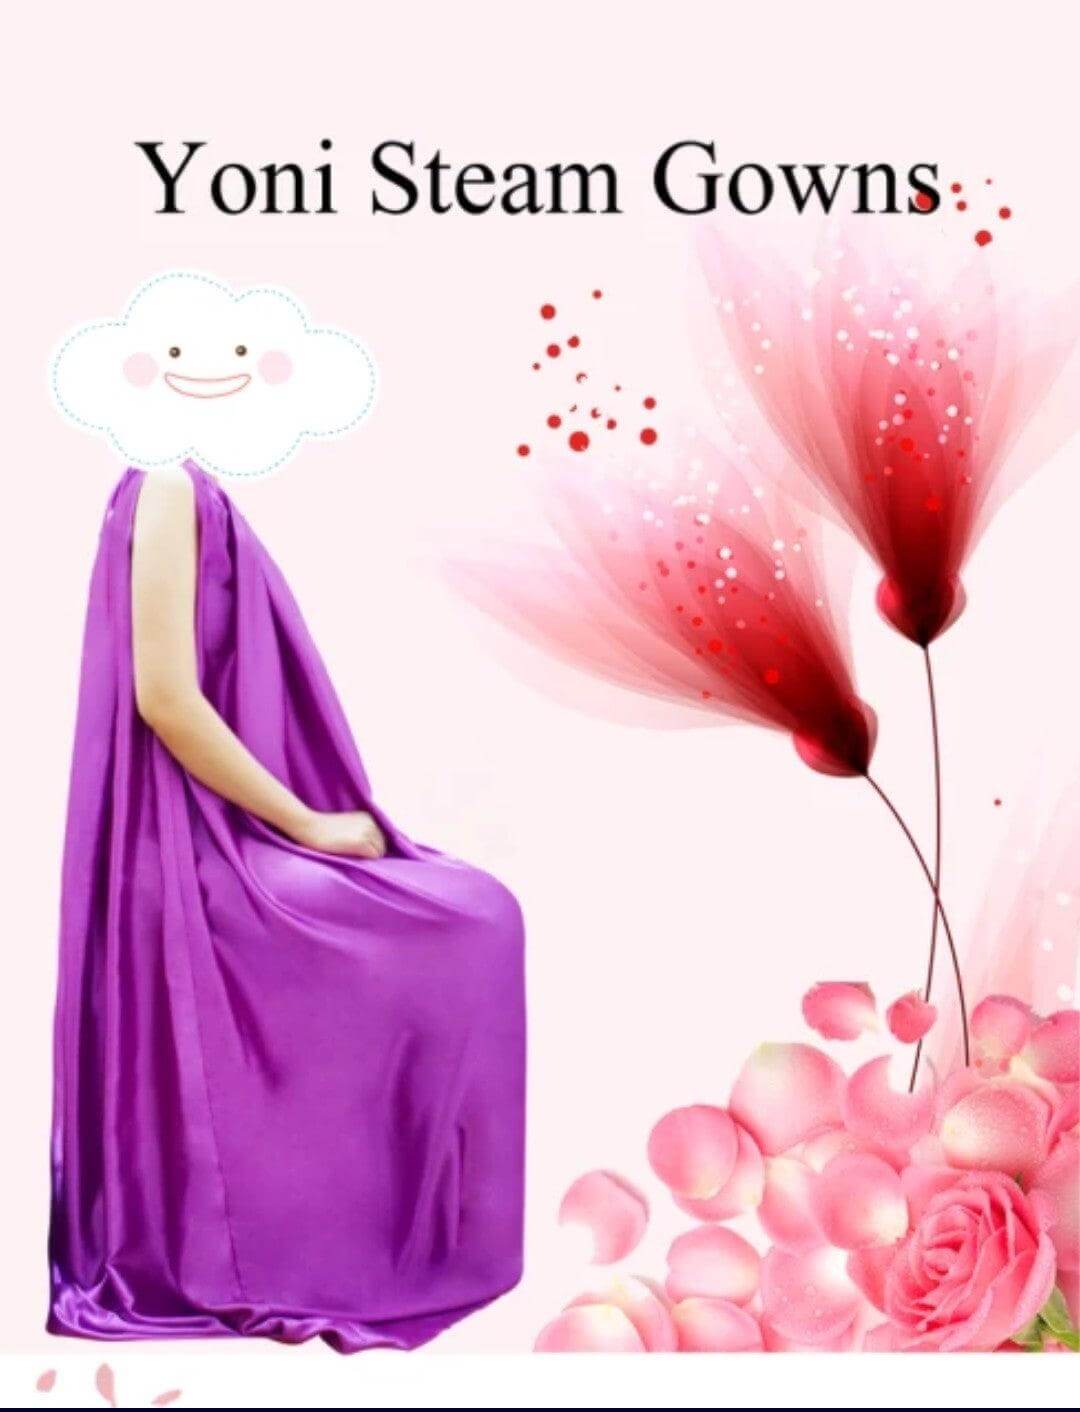 STEAM GOWN - vagicareproducts